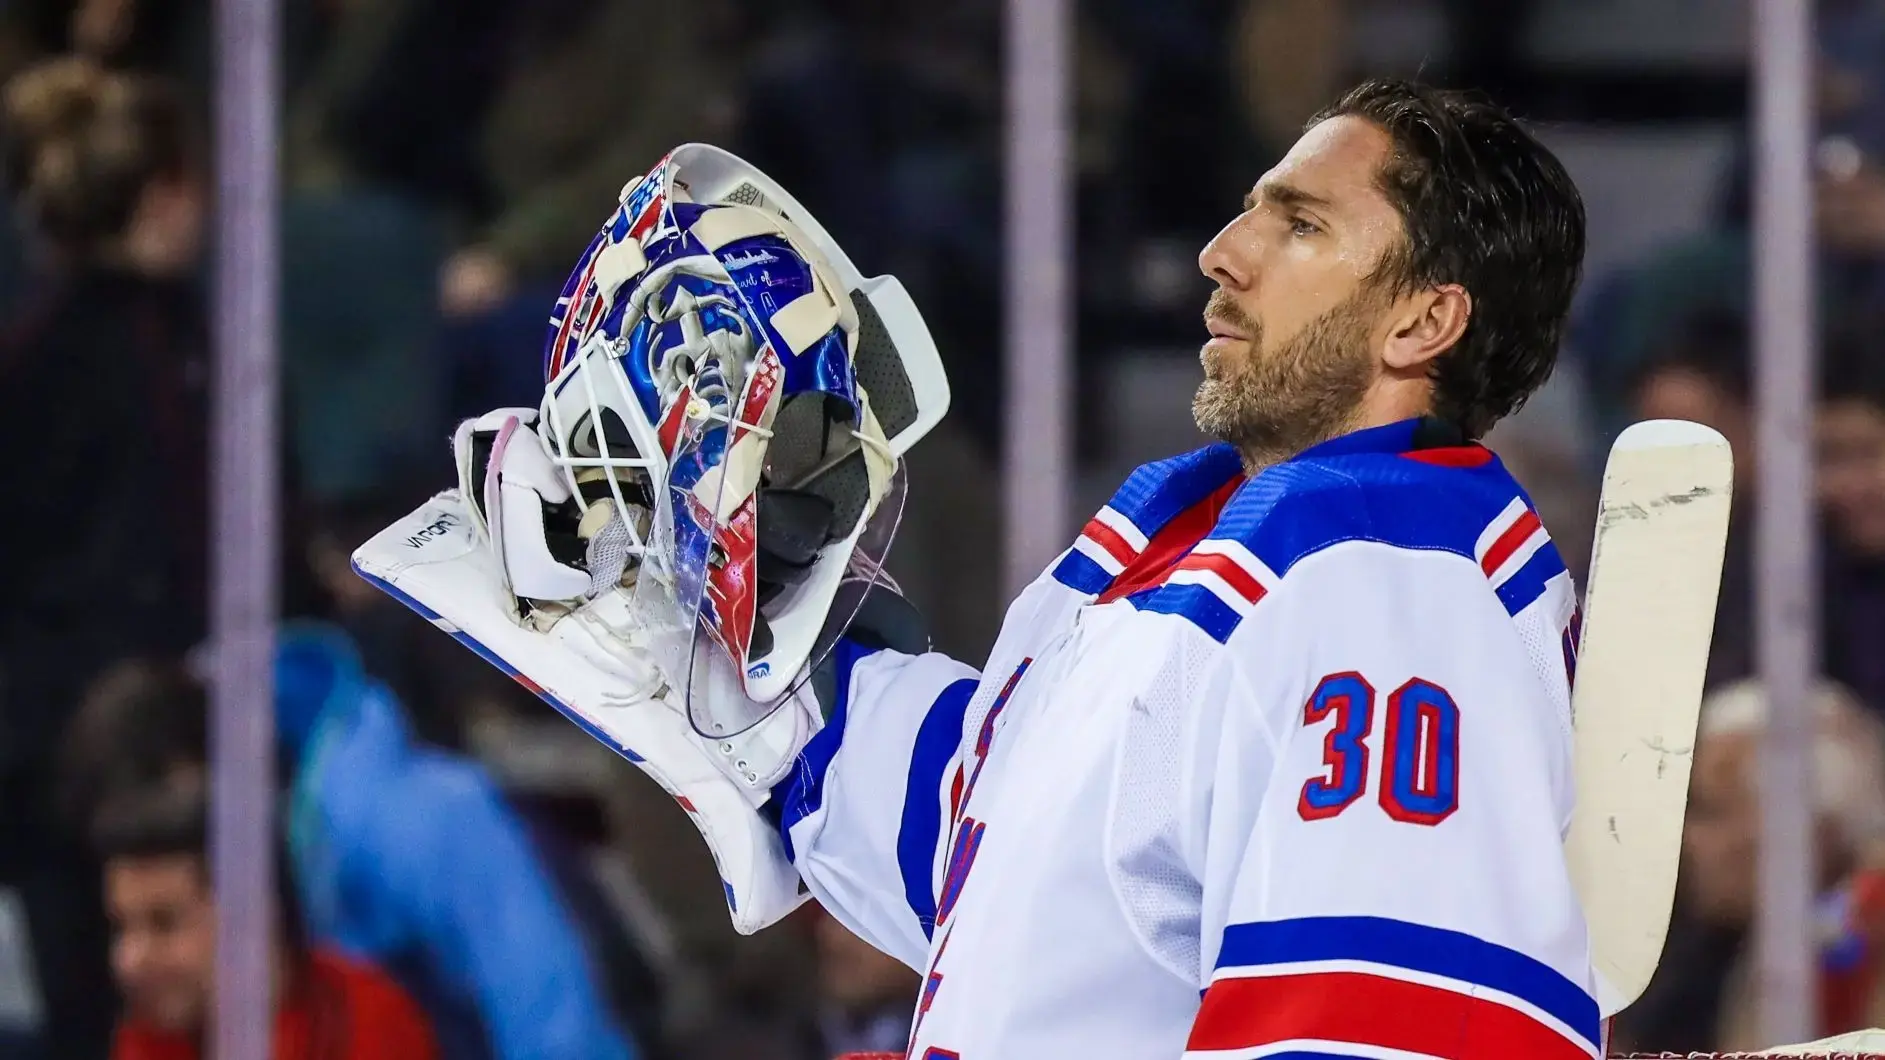 Jan 2, 2020; Calgary, Alberta, CAN; New York Rangers goaltender Henrik Lundqvist (30) reacts during the first period against the Calgary Flames at Scotiabank Saddledome. Mandatory Credit: Sergei Belski-USA TODAY Sports / © Sergei Belski-USA TODAY Sports